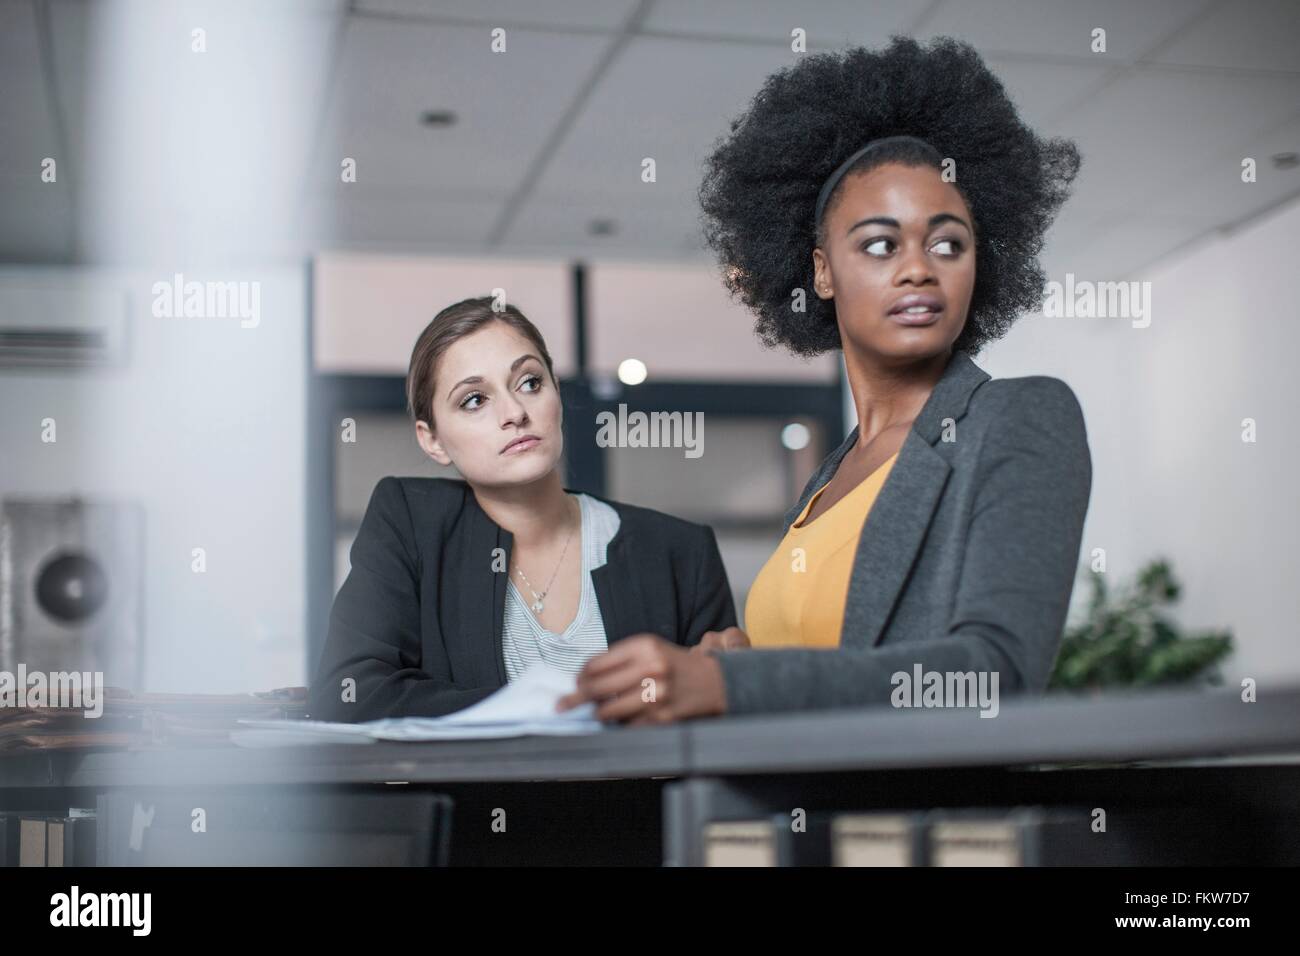 Two young businesswomen distracted at office reception Stock Photo